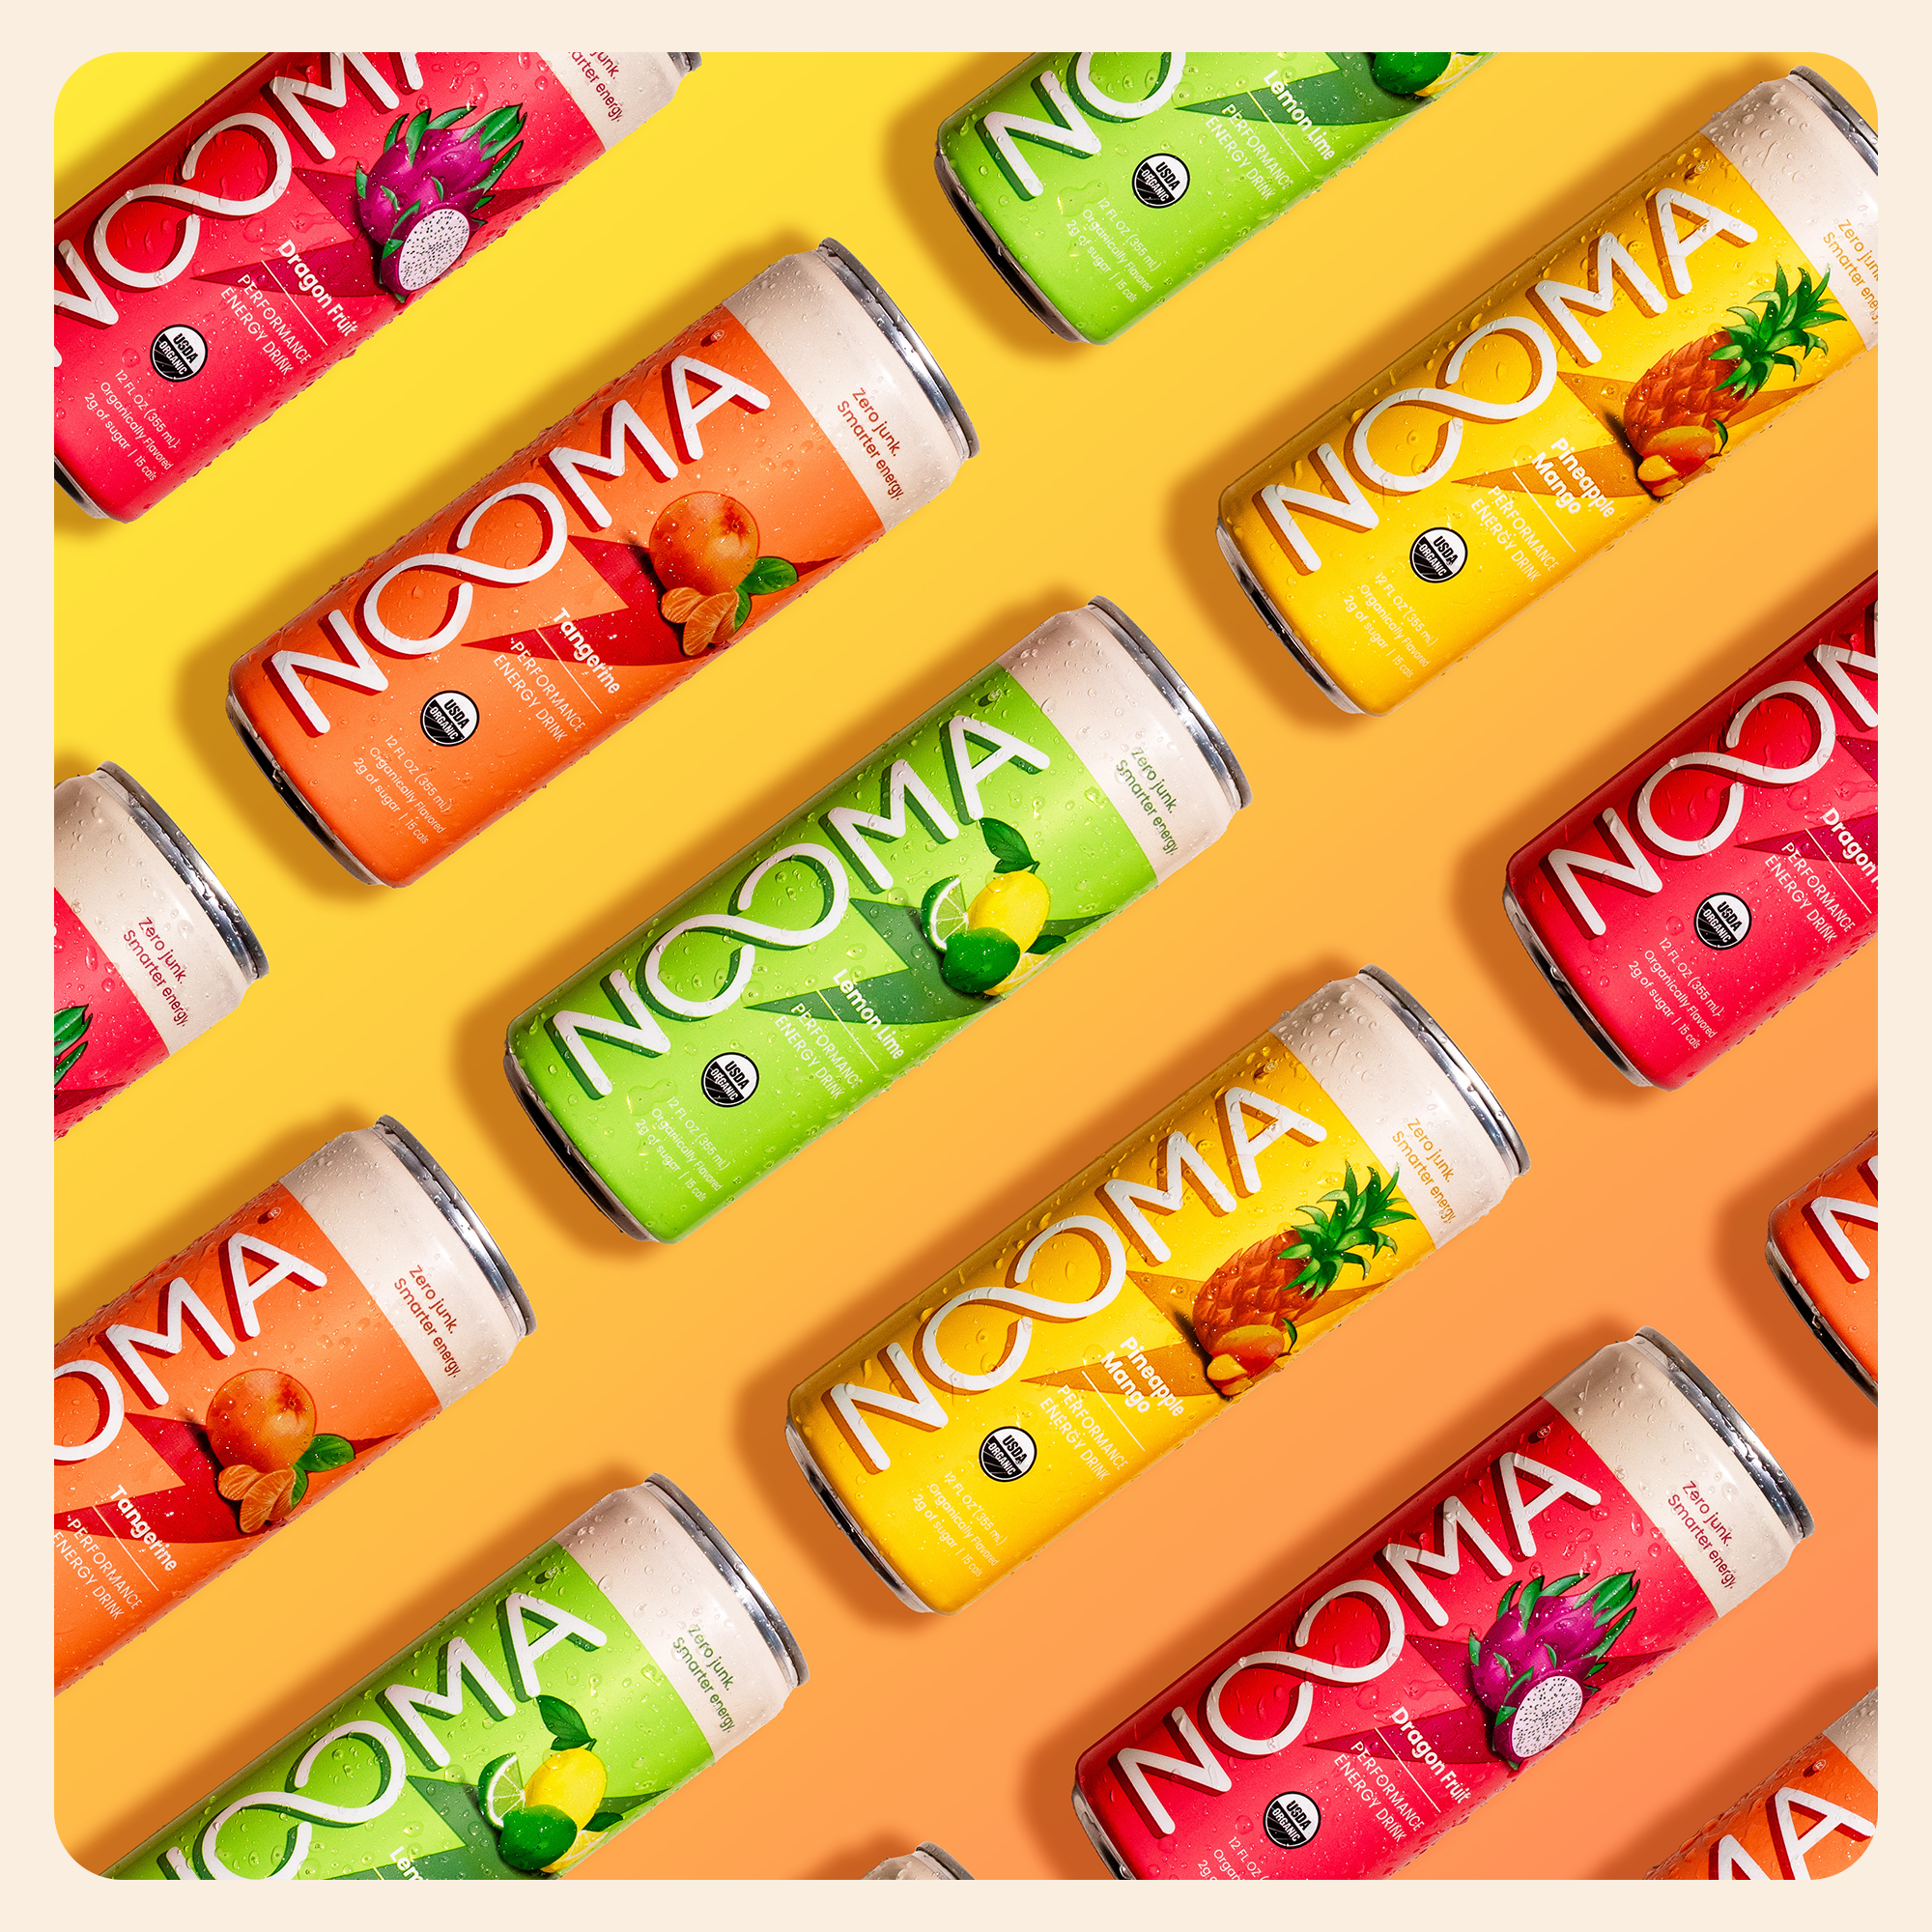 Nooma Energy Drink Variety Pack